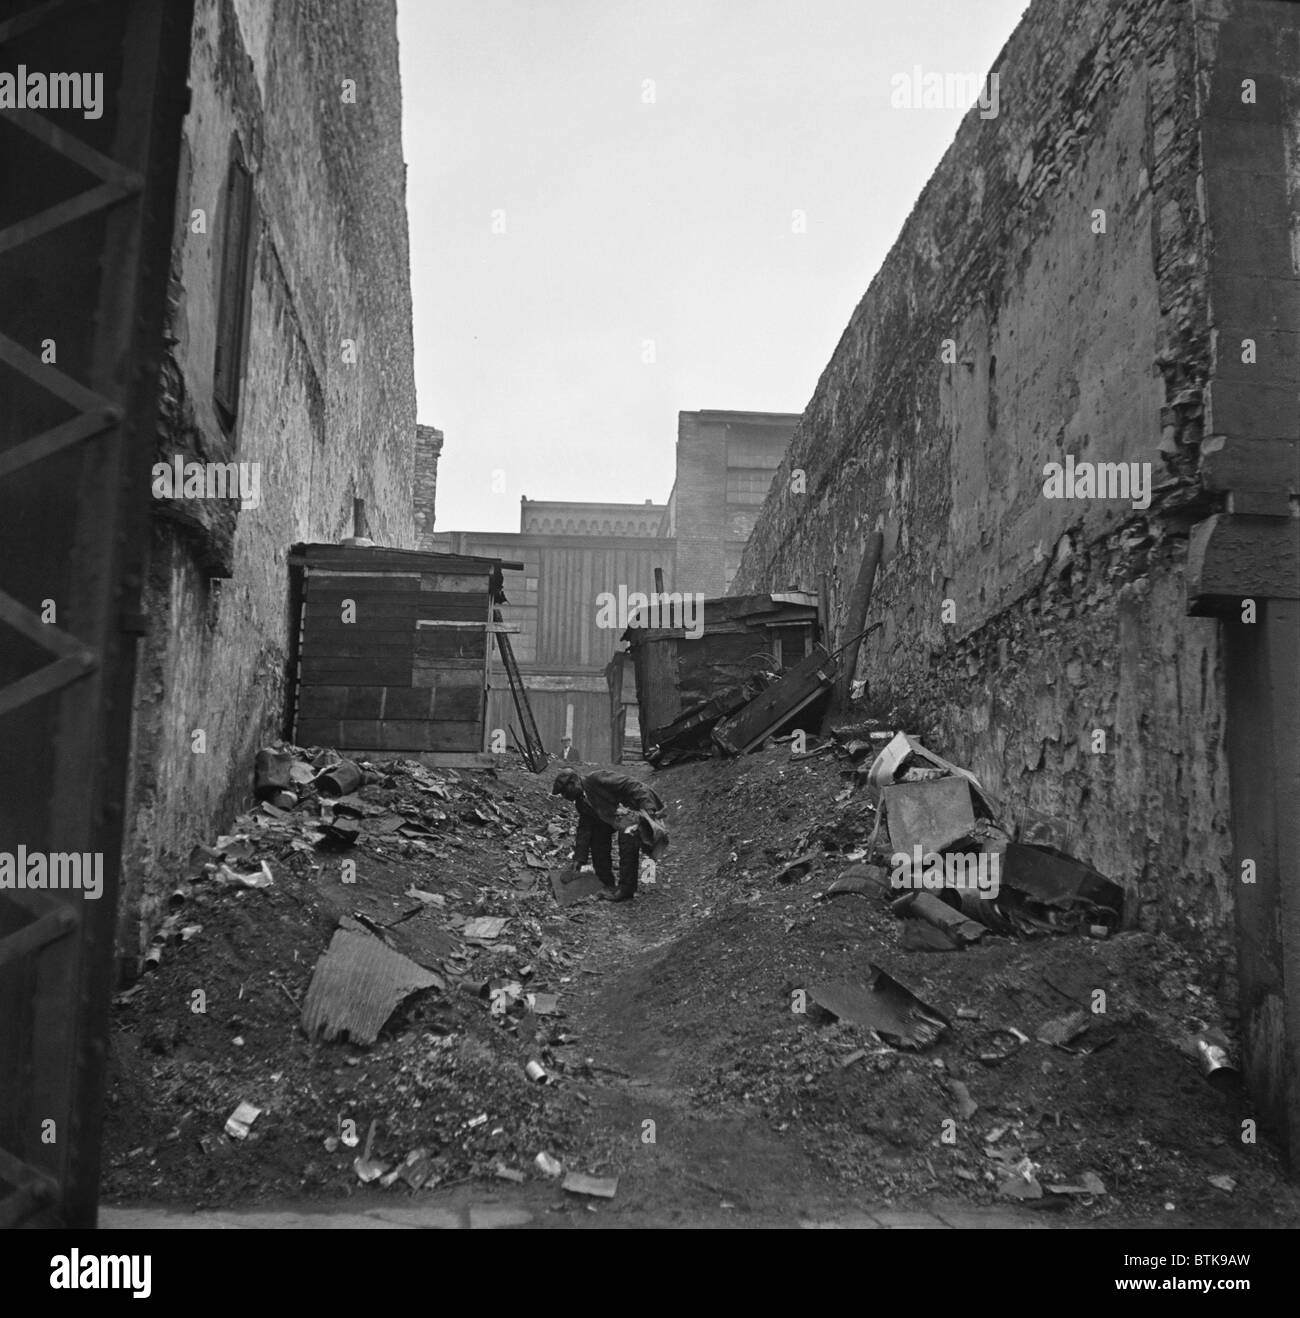 A homeless African American man searches through garbage in a squatter neighborhood along the riverfront in St. Louis, Missouri. 1935 photo by Arthur Rothstein. Stock Photo